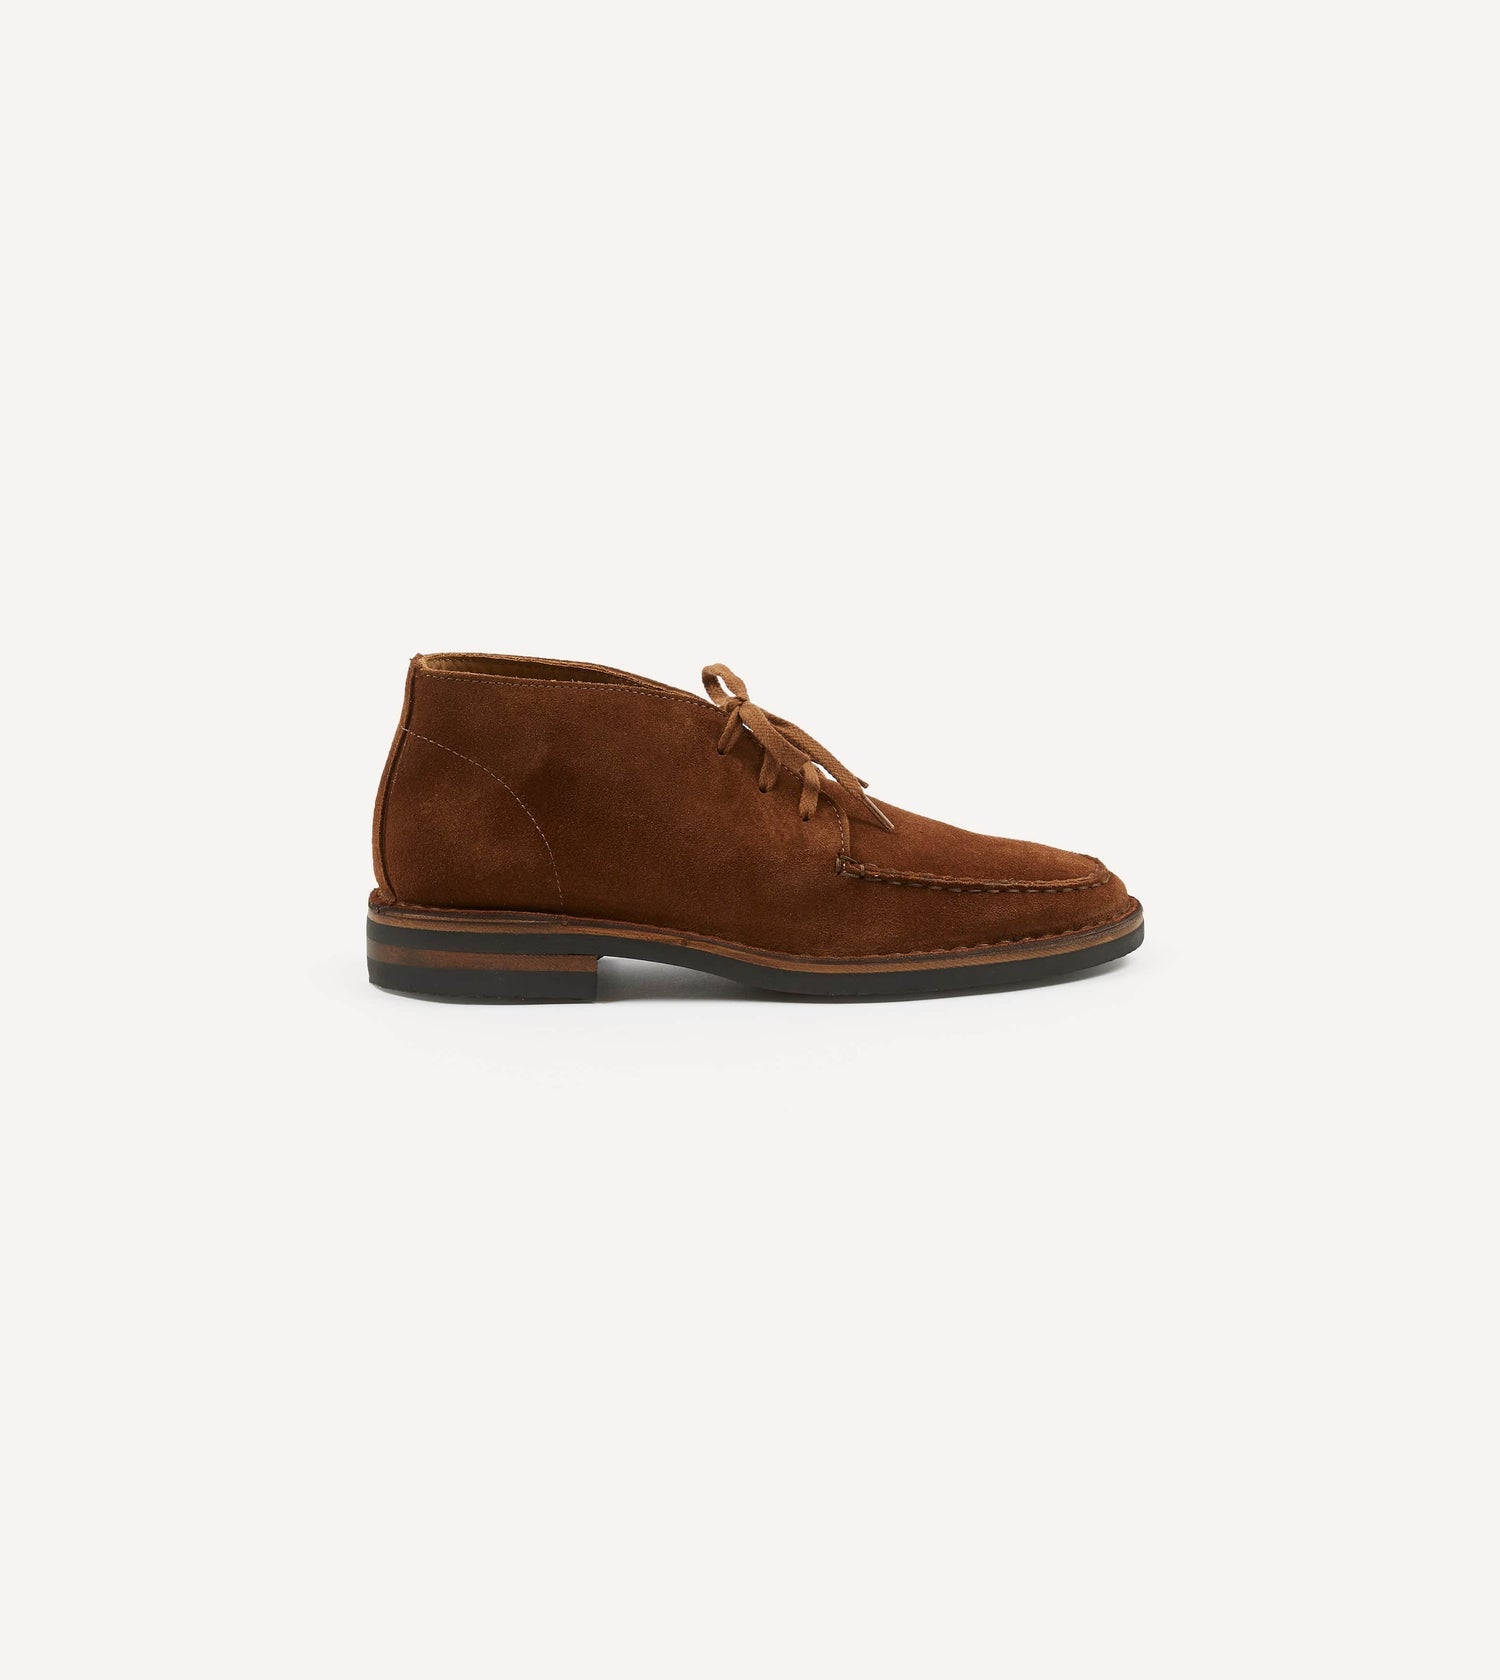 Crosby Moc-Toe Chukka Boot Light Brown Roughout Suede with Rubber Sole